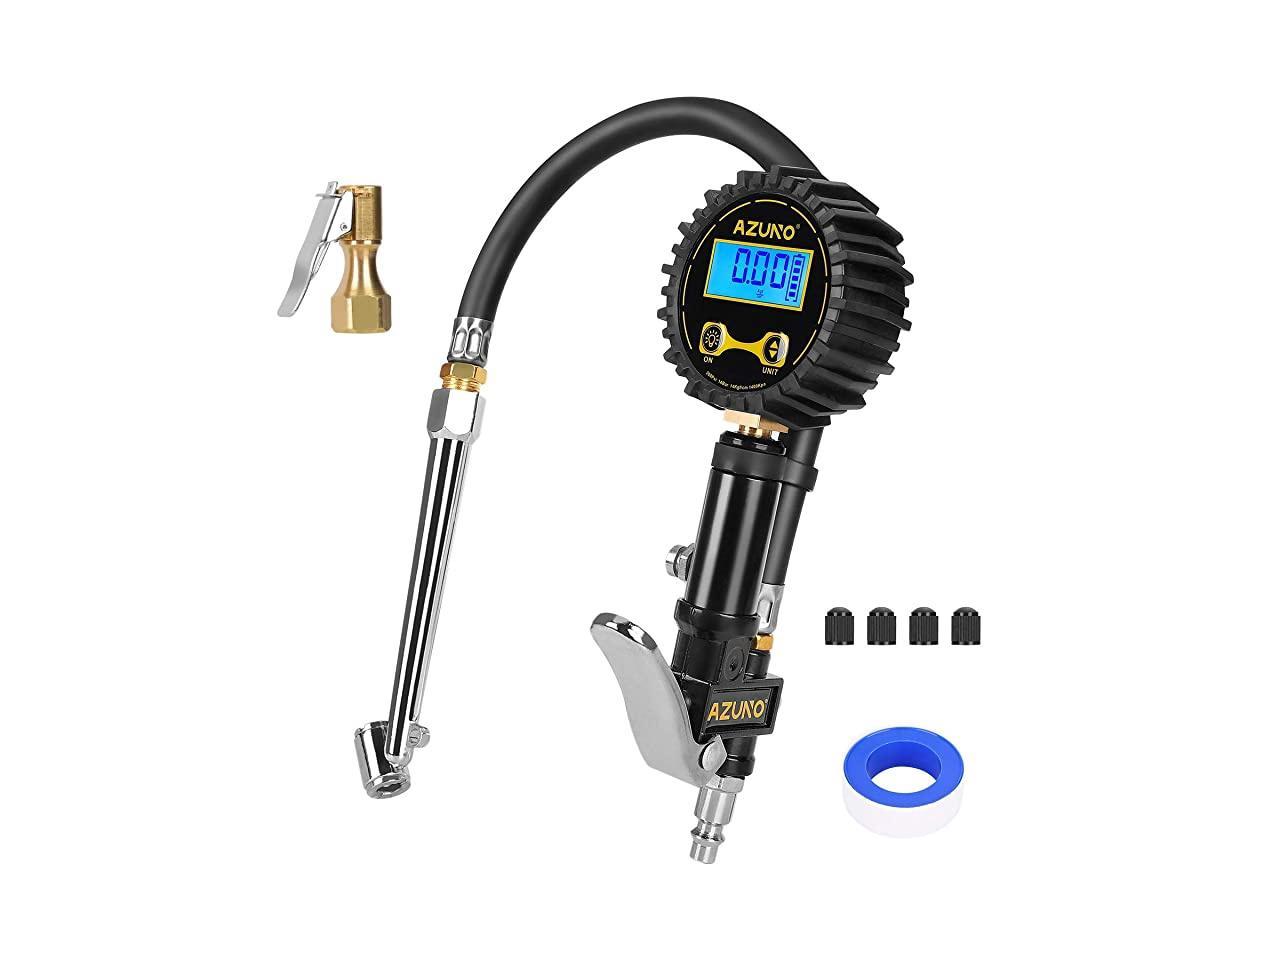 4 Valve Caps and 90 Degree Valve Extender for Car Motorcycle Bicycle Valve Air Chuck LingsFire Digital Tyre Pressure Gauge Tyre Inflator with Pressure Gauge 200 PSI LCD Displaywith Flexible Hose